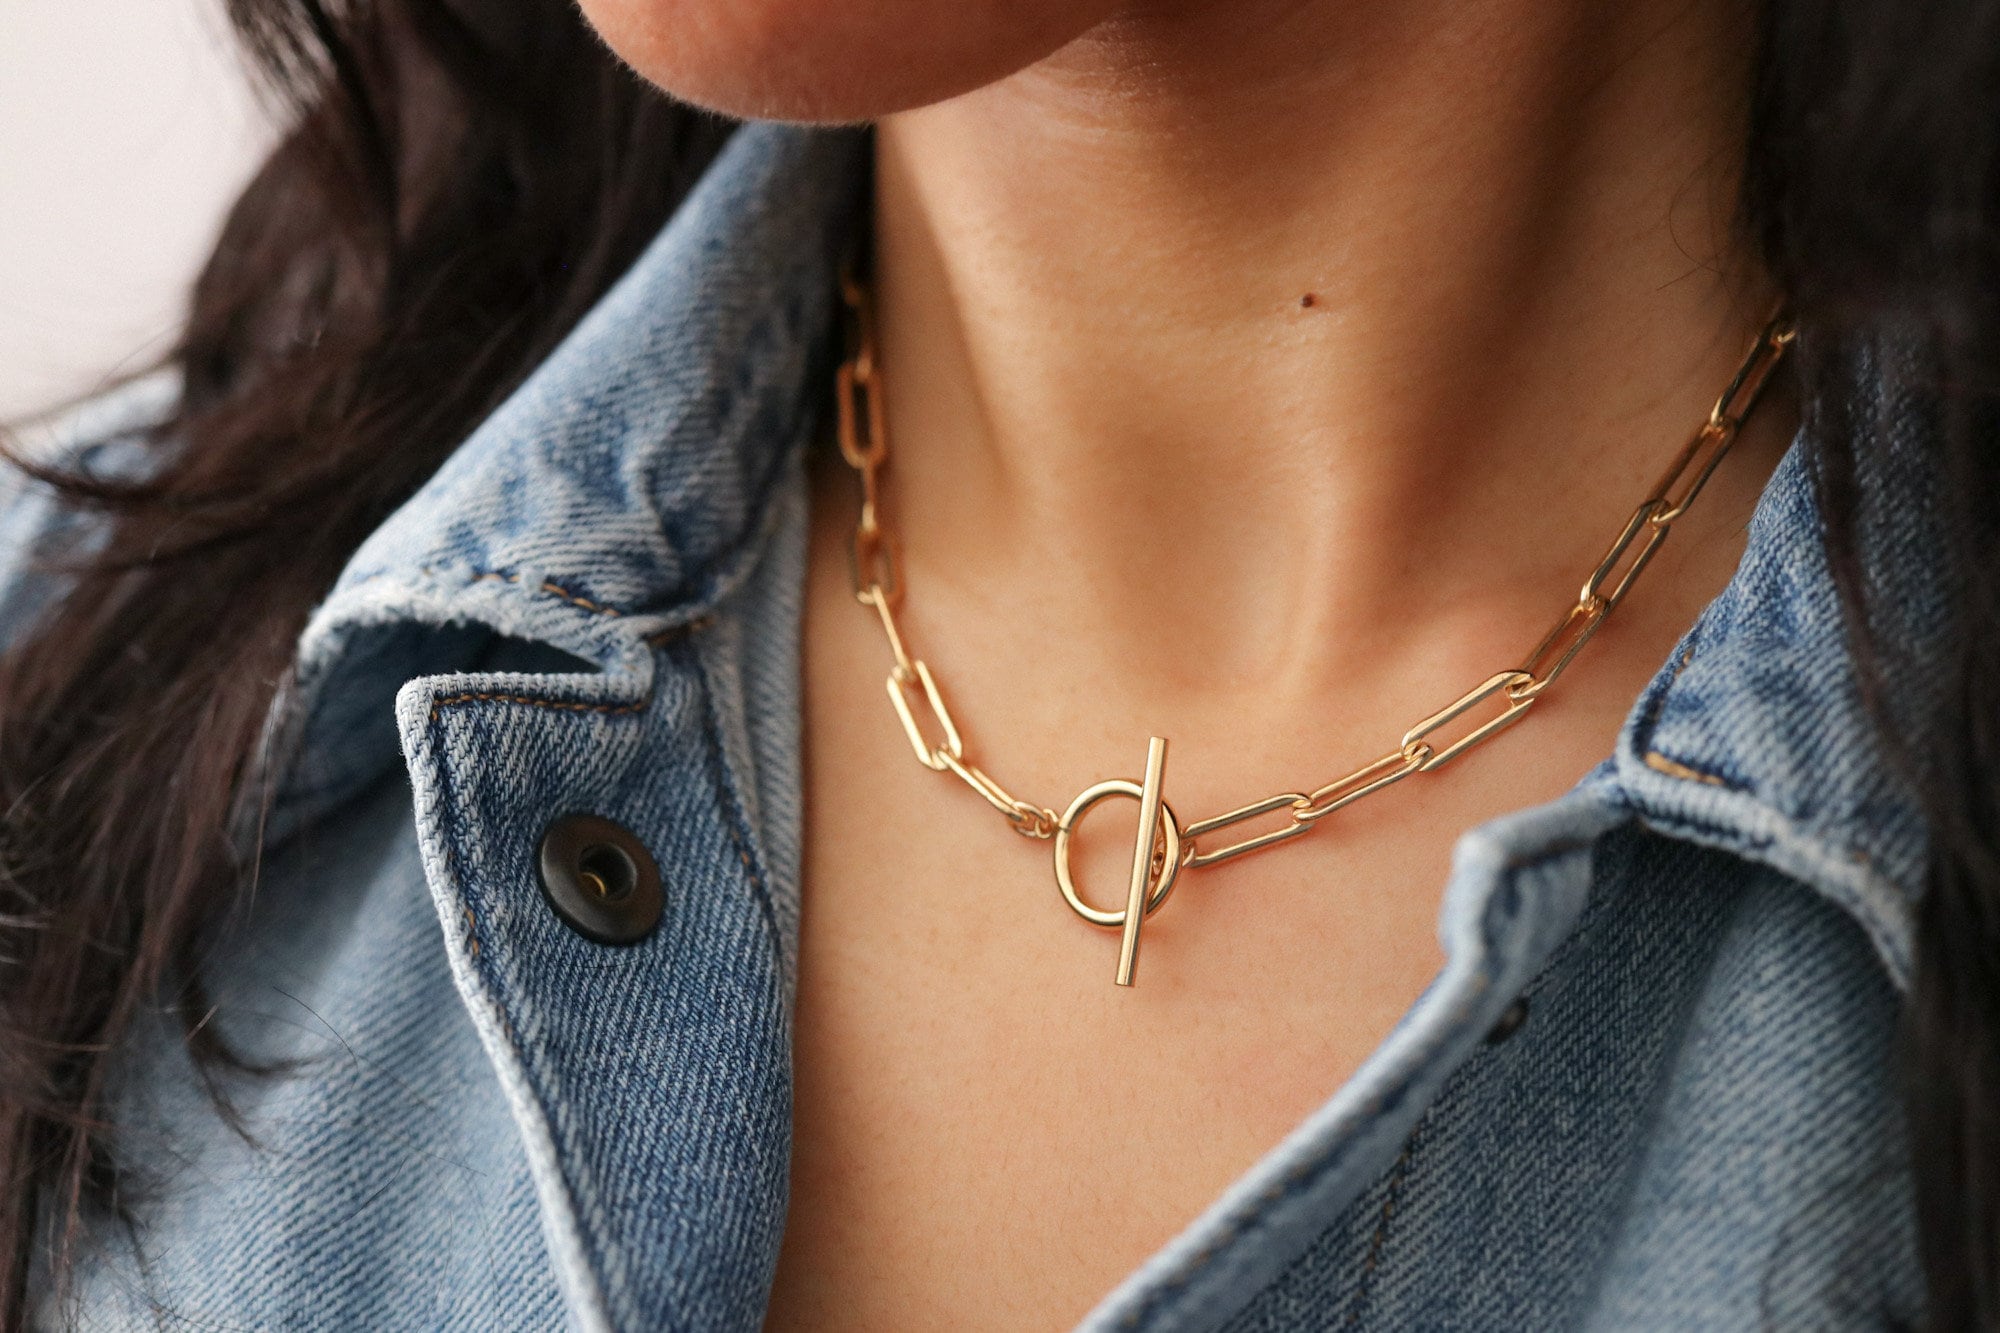 Toggle Clasp Necklace - Paperclip Chain Necklace - Thick Chain - Sterling Silver or 14K Gold Filled